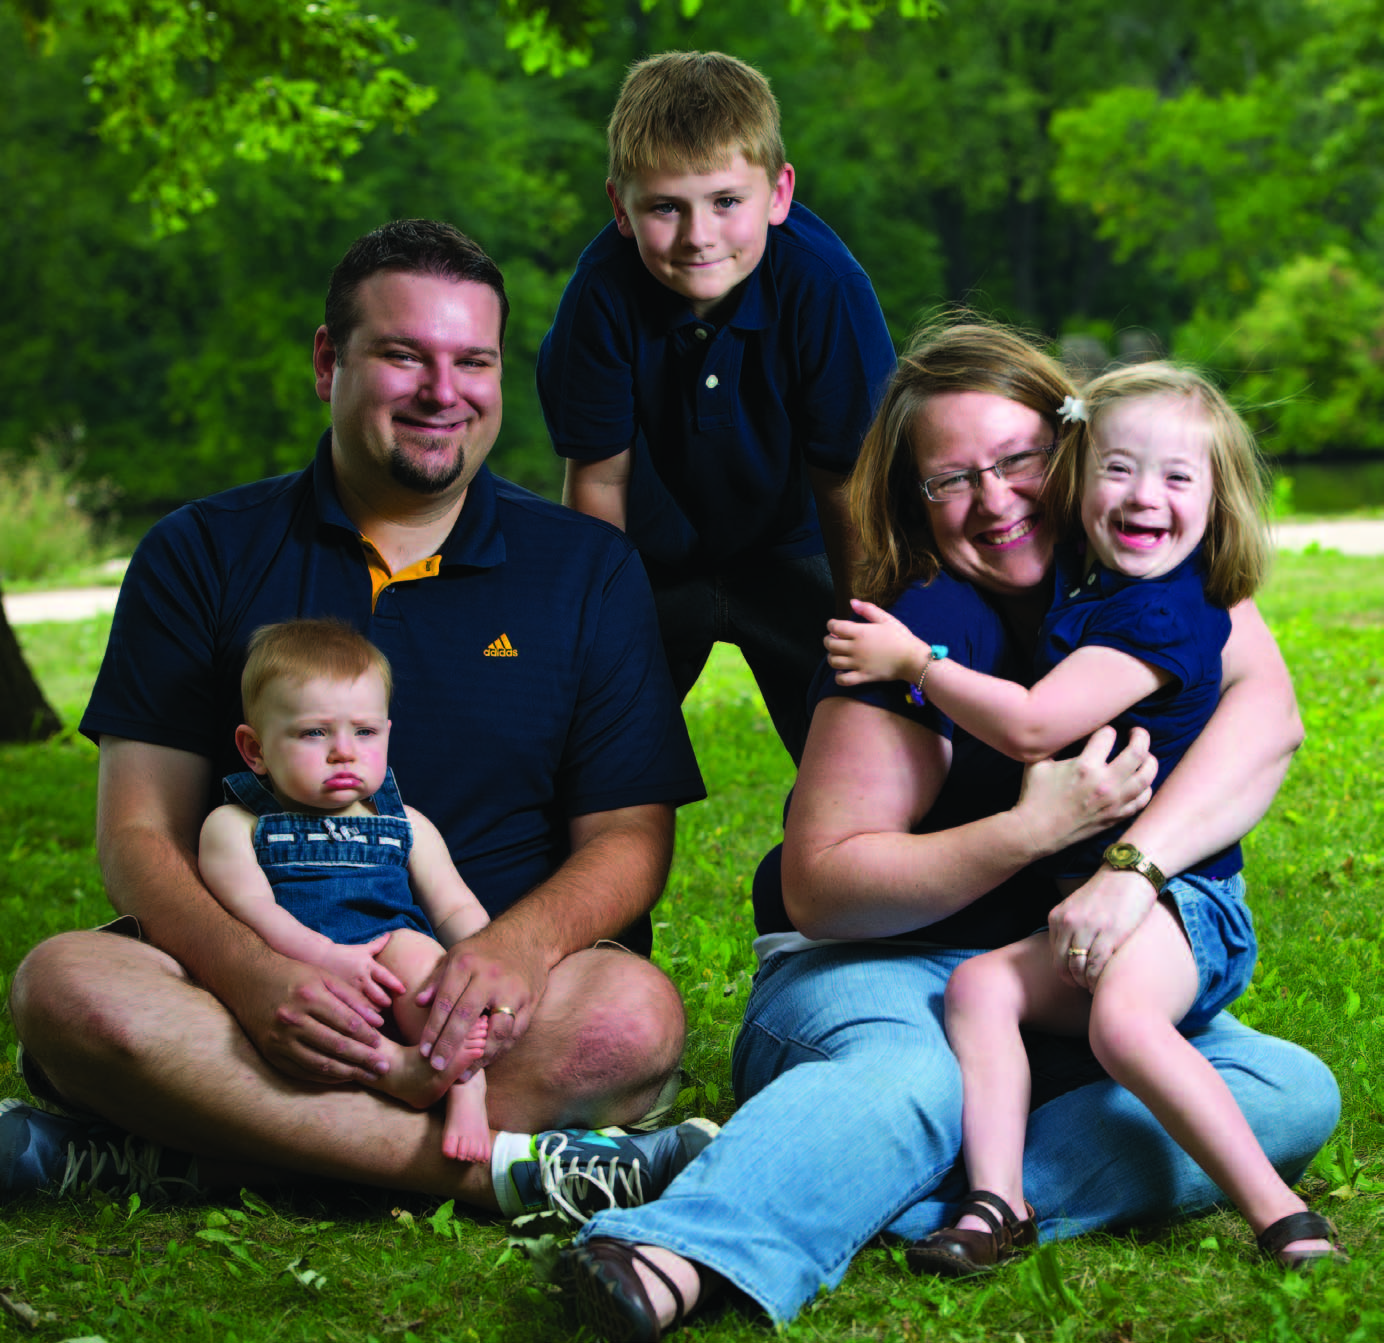 Michelle and Matthew Odland family, Wausau